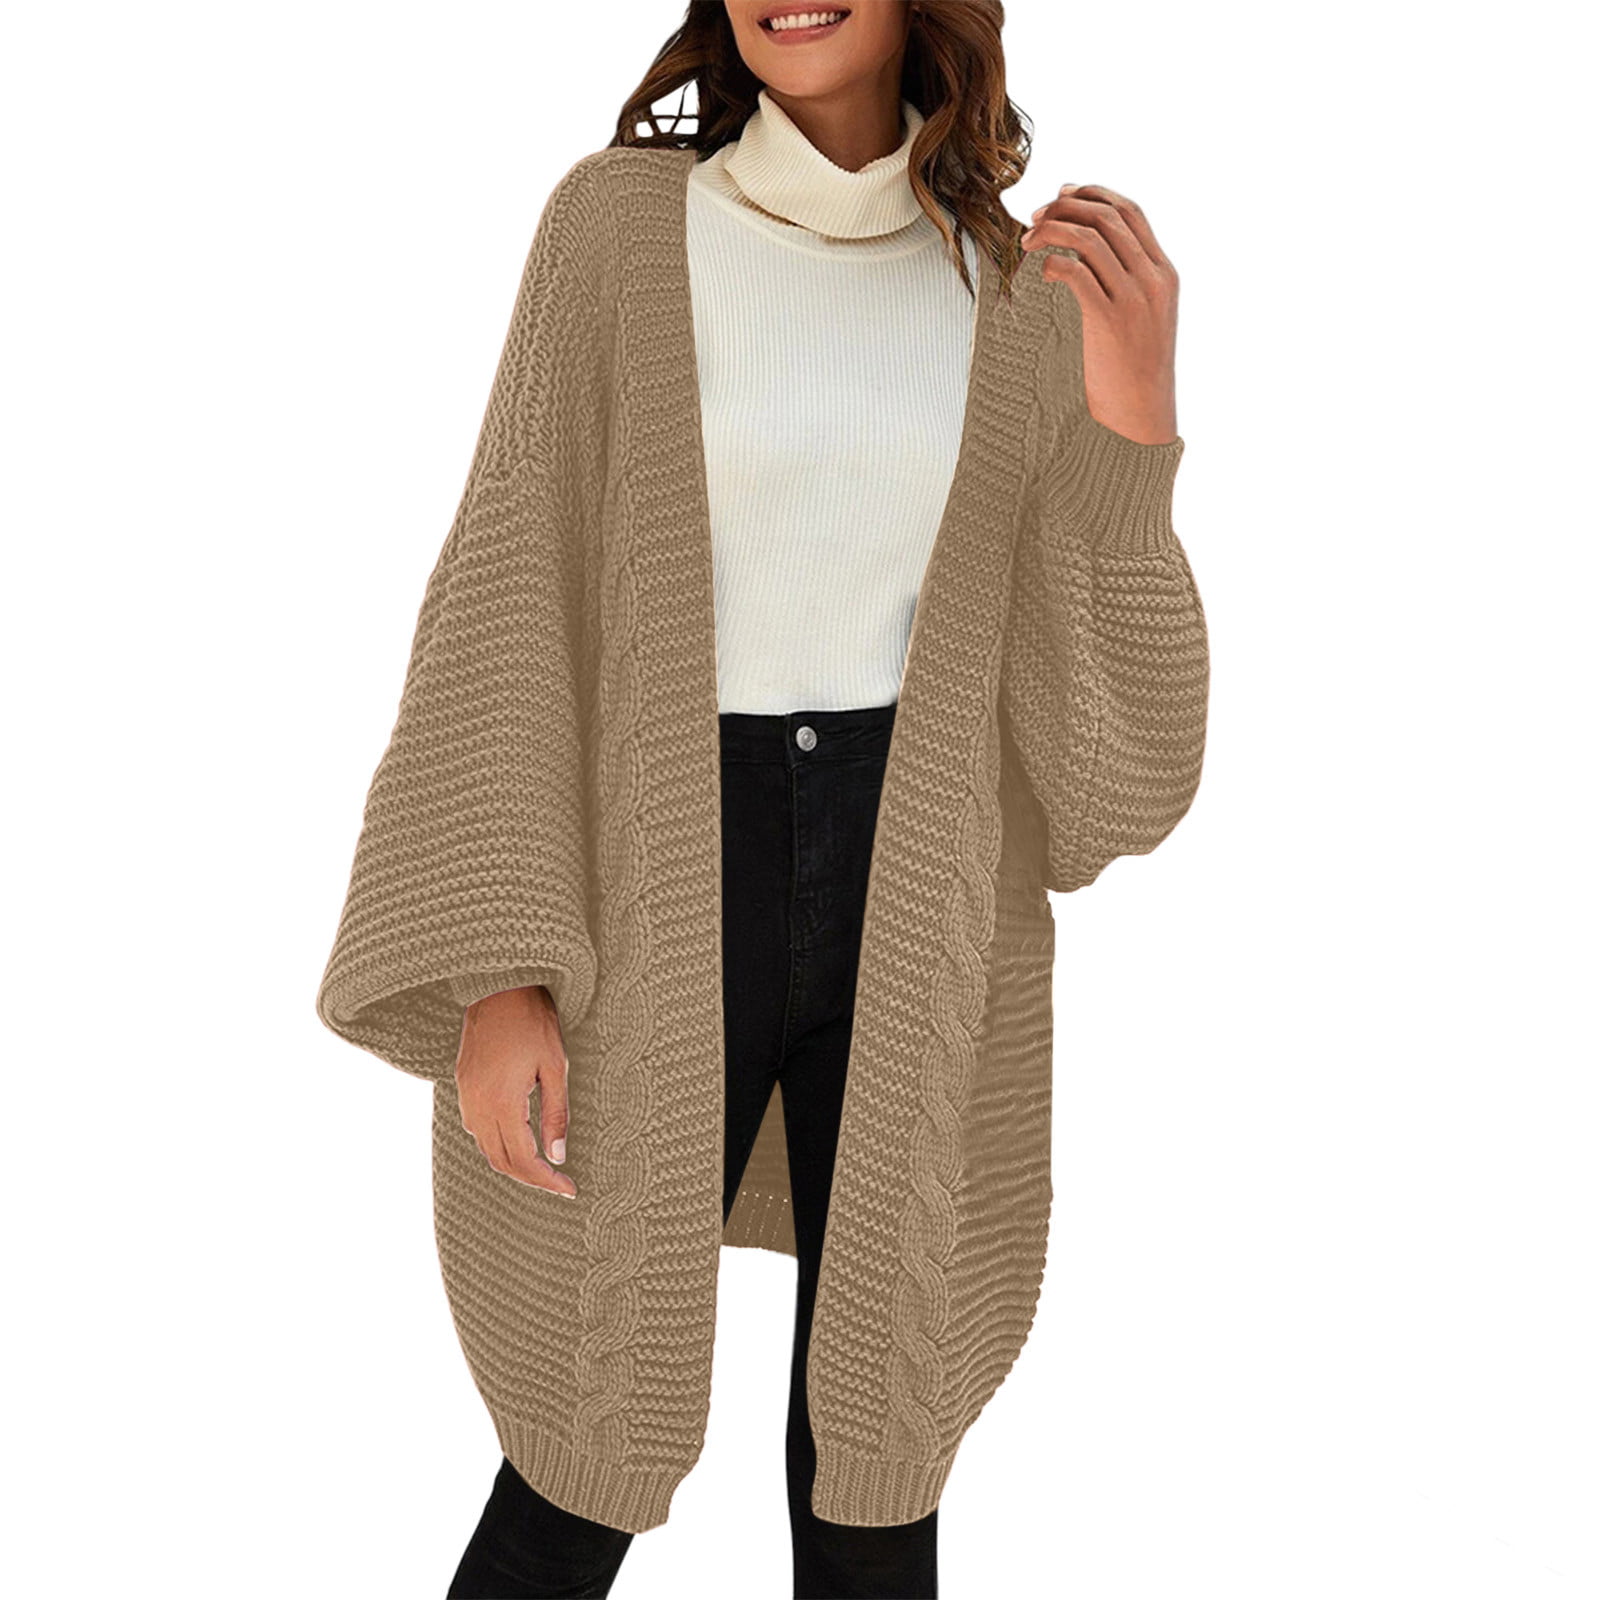 CAICJ98 Women'S Sweaters And Cardigans Women Open Front Cardigan